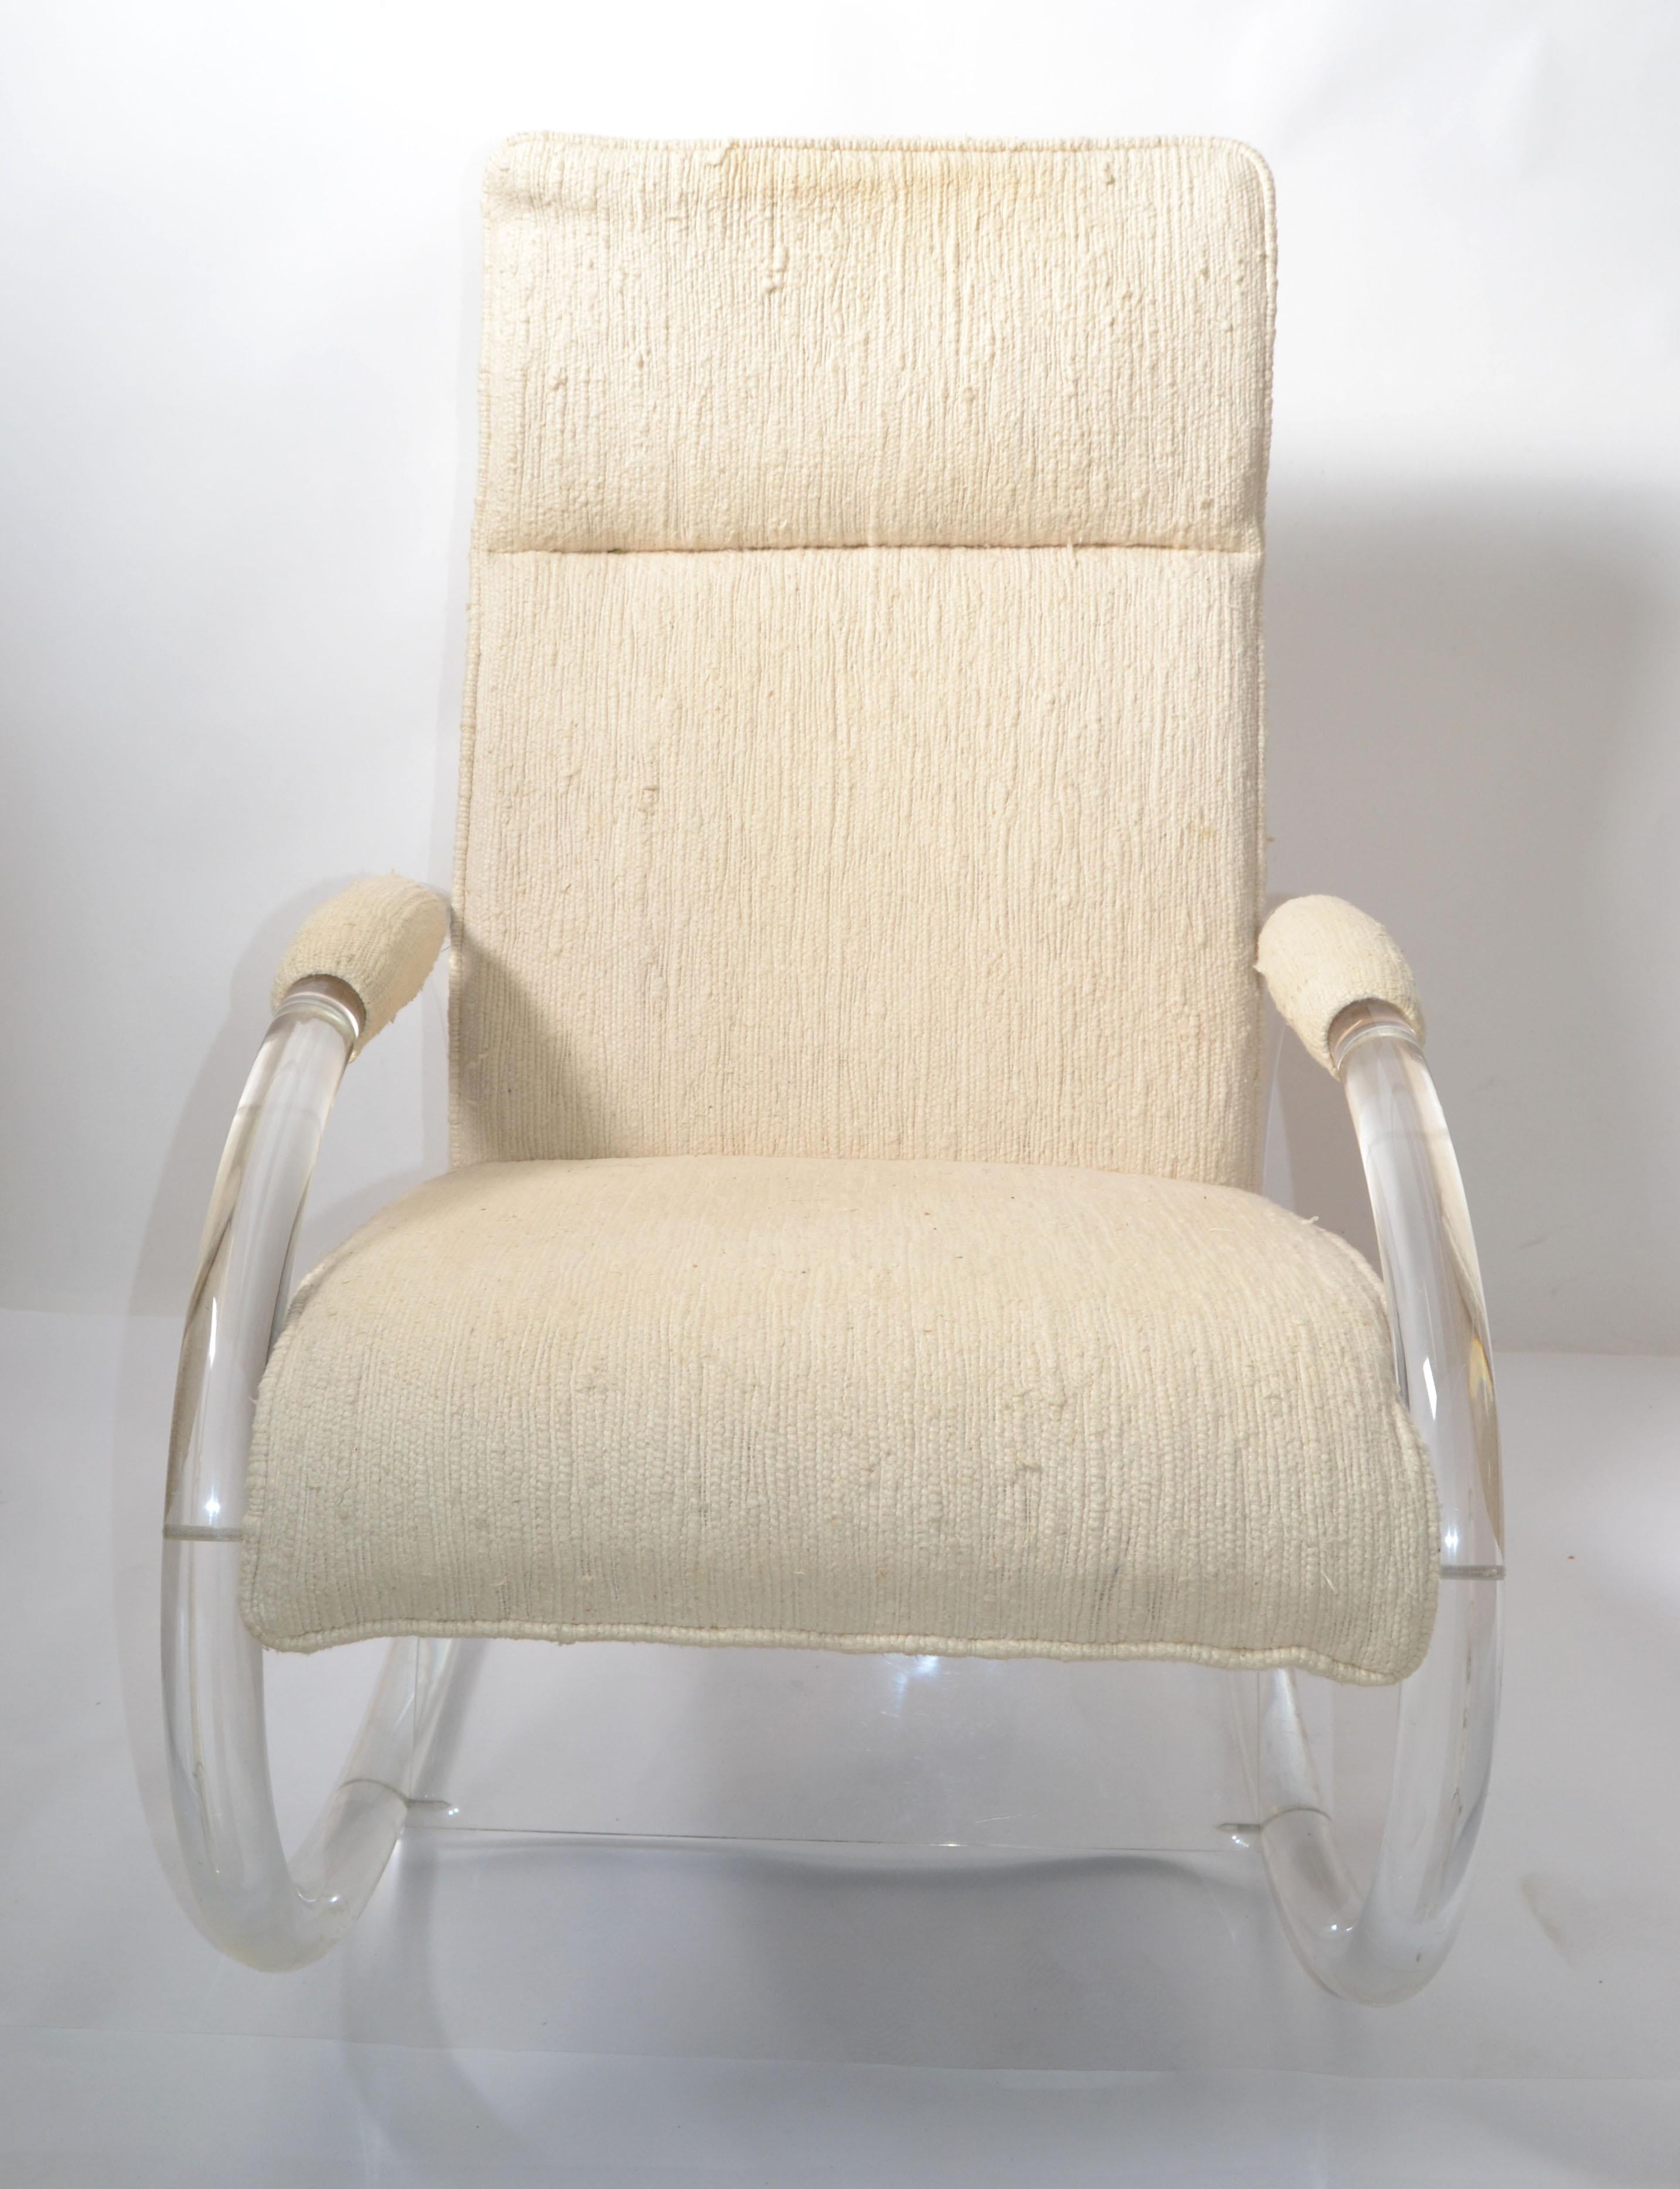 Mid-Century Modern bent Lucite and wood rocking chair designed by Charles Hollis Jones in the 1970s and made by Hill Manufacturing Corporation.
The Lounge Chair has the original beige Haitian Cotton upholstery.
Makers mark underneath.
Additional